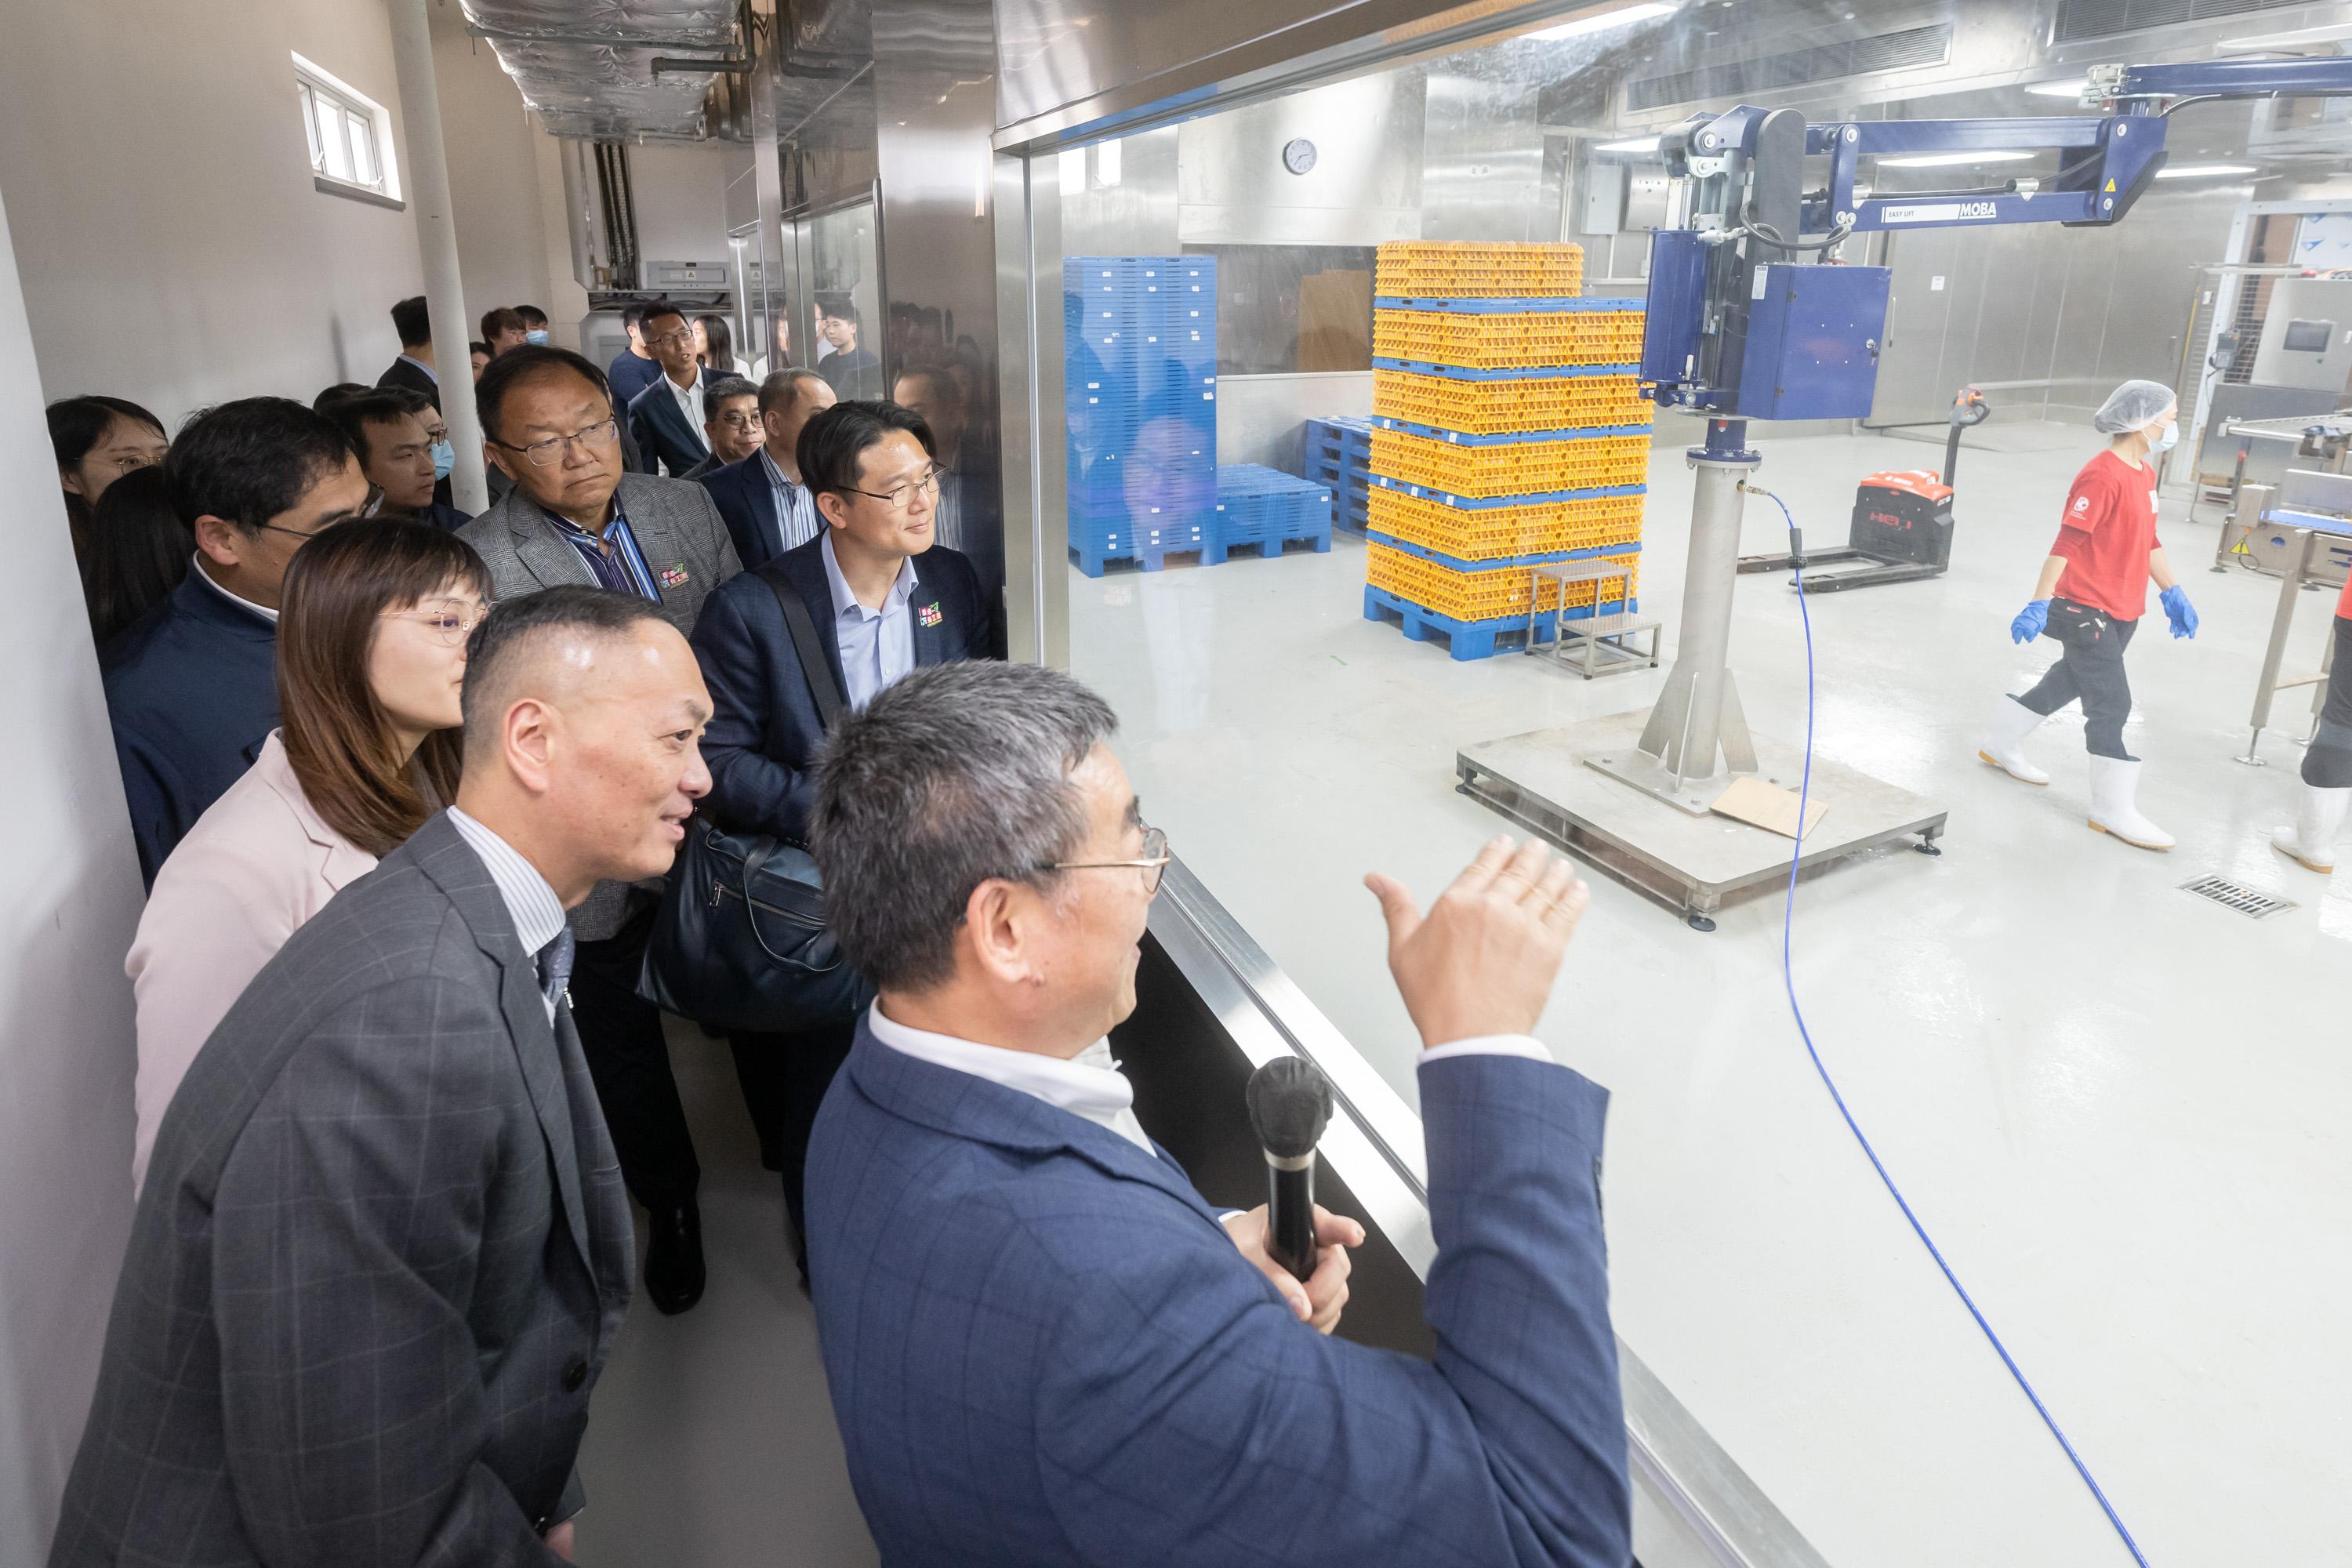 The Legislative Council (LegCo) Subcommittee on Matters Relating to the Promotion of New Industrialization visited the smart production lines funded by the Innovation and Technology Fund in Tai Po InnoPark today (February 27). Photo shows Members learning about adopting smart manufacturing technologies for fresh liquid egg products.